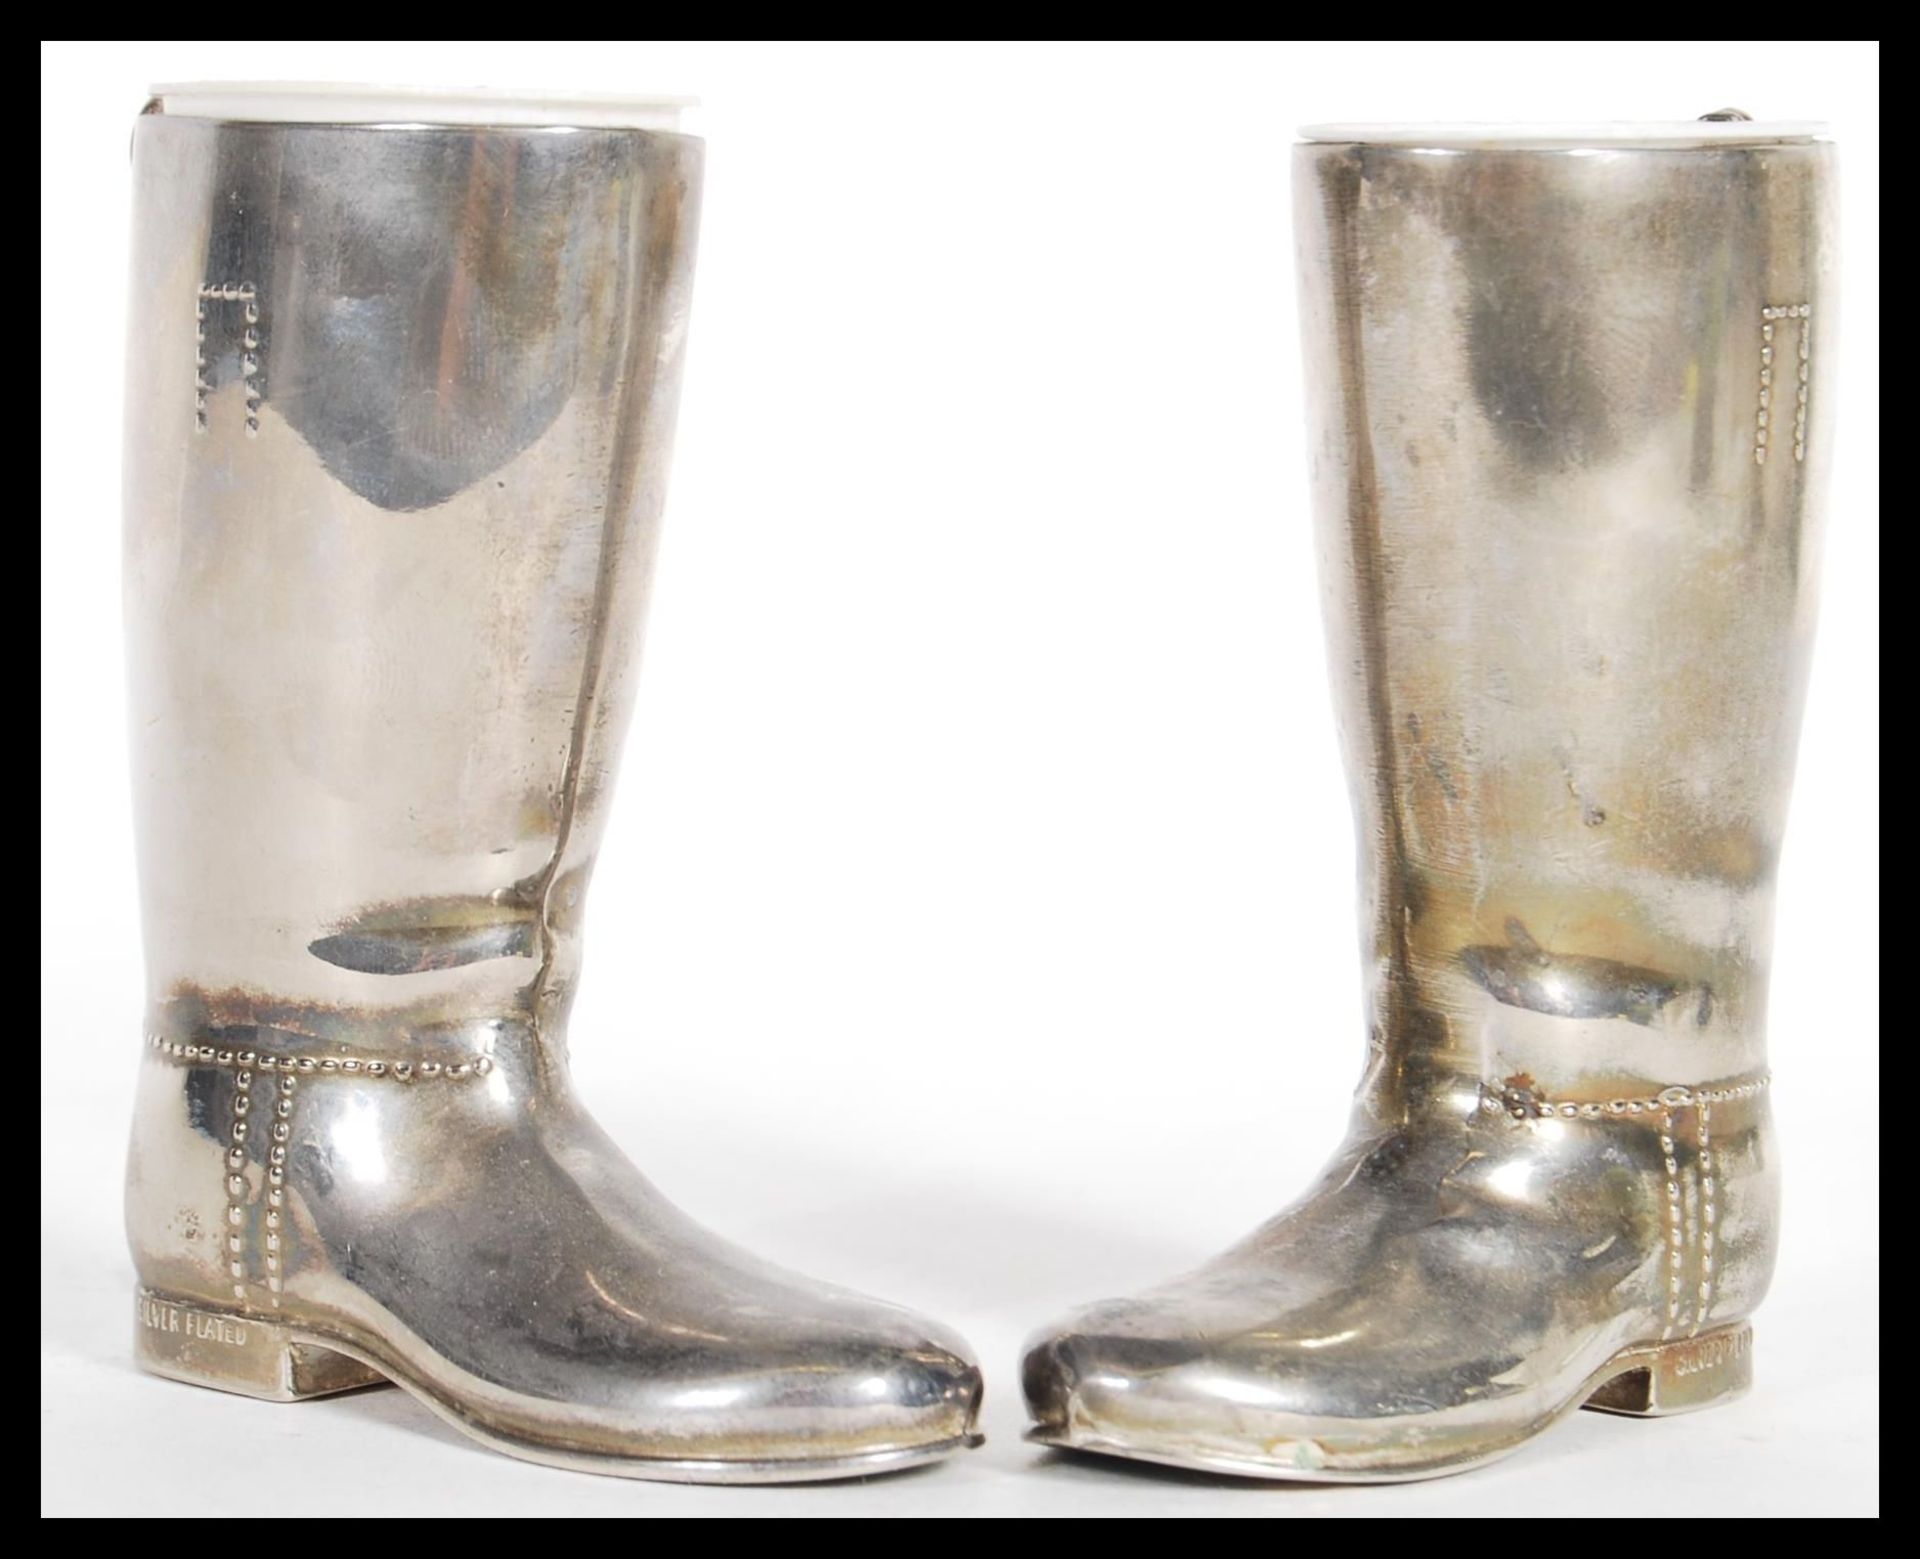 A pair of 20th century silver plated boot measures for spirits. Complete with the white inner